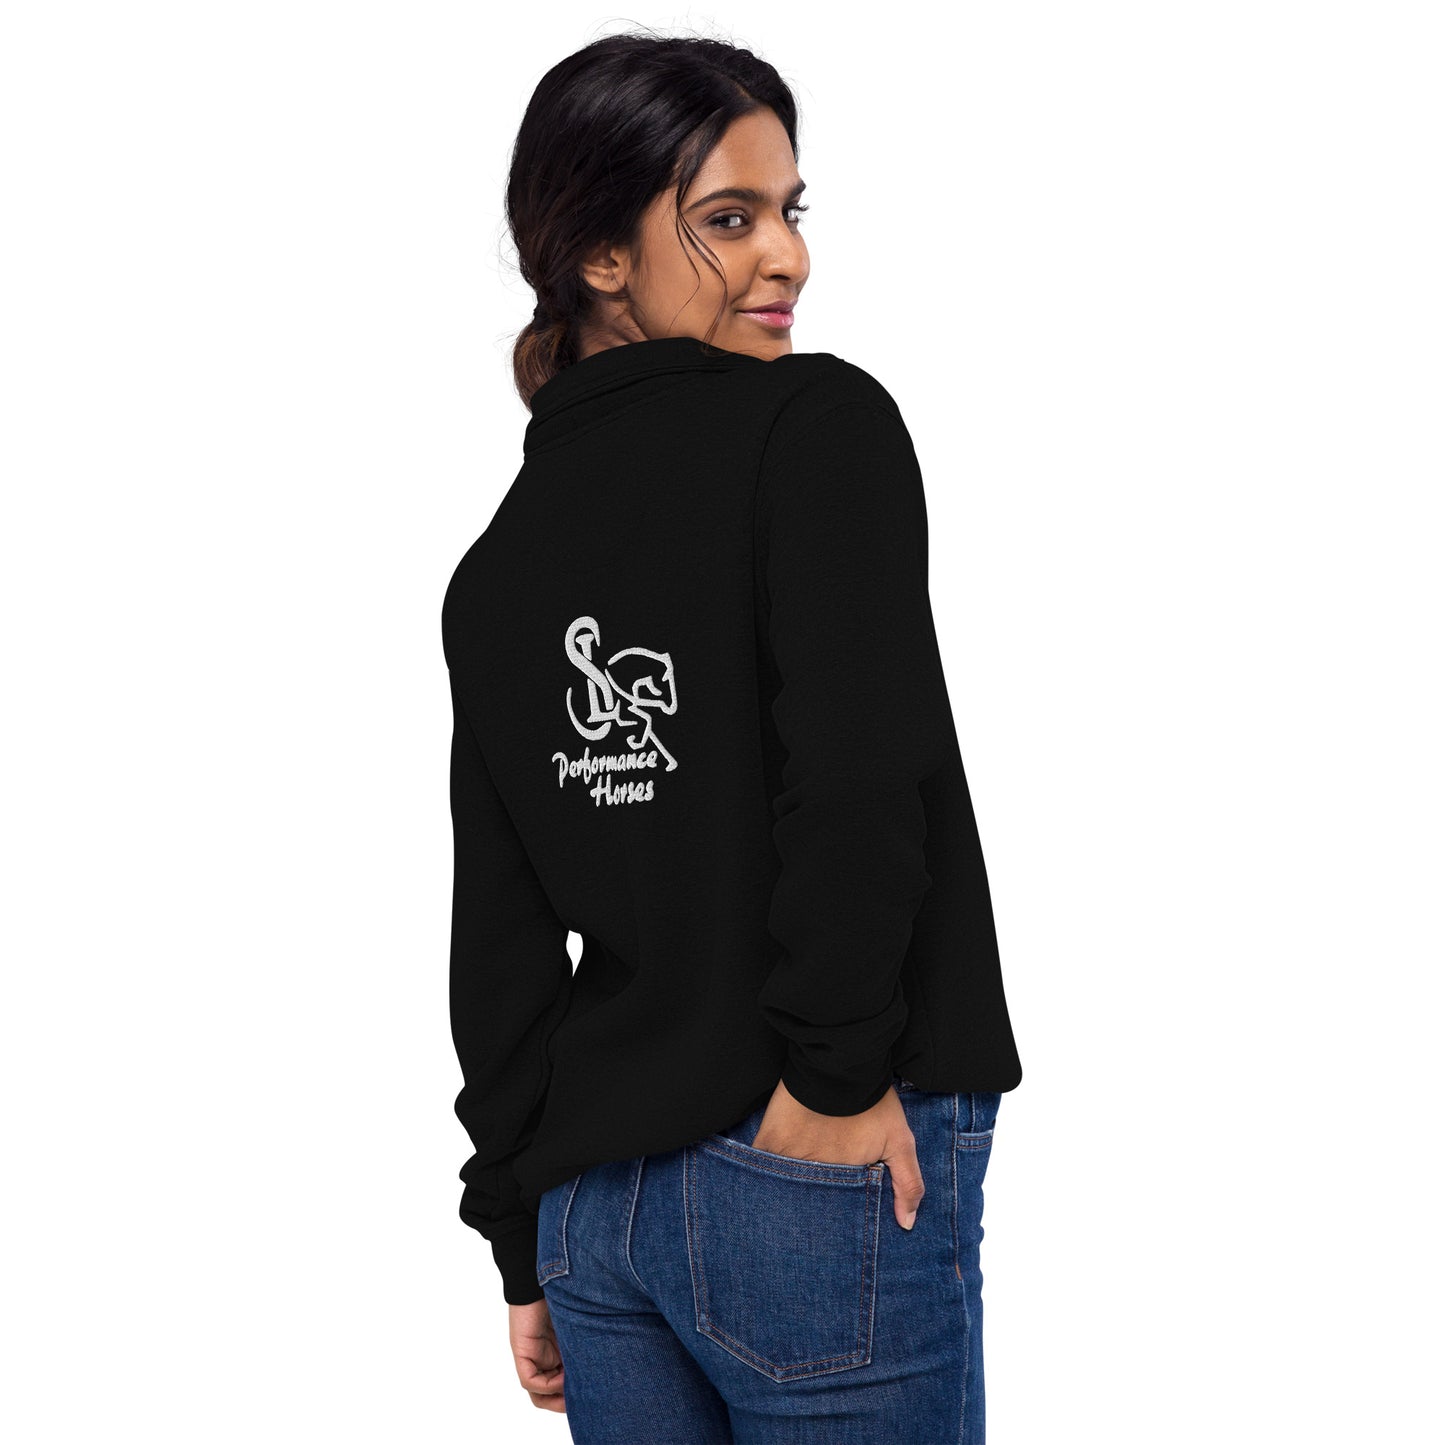 Unisex DOUBLE SIDED Embroidered Fleece Pullover - SL Performance Horses